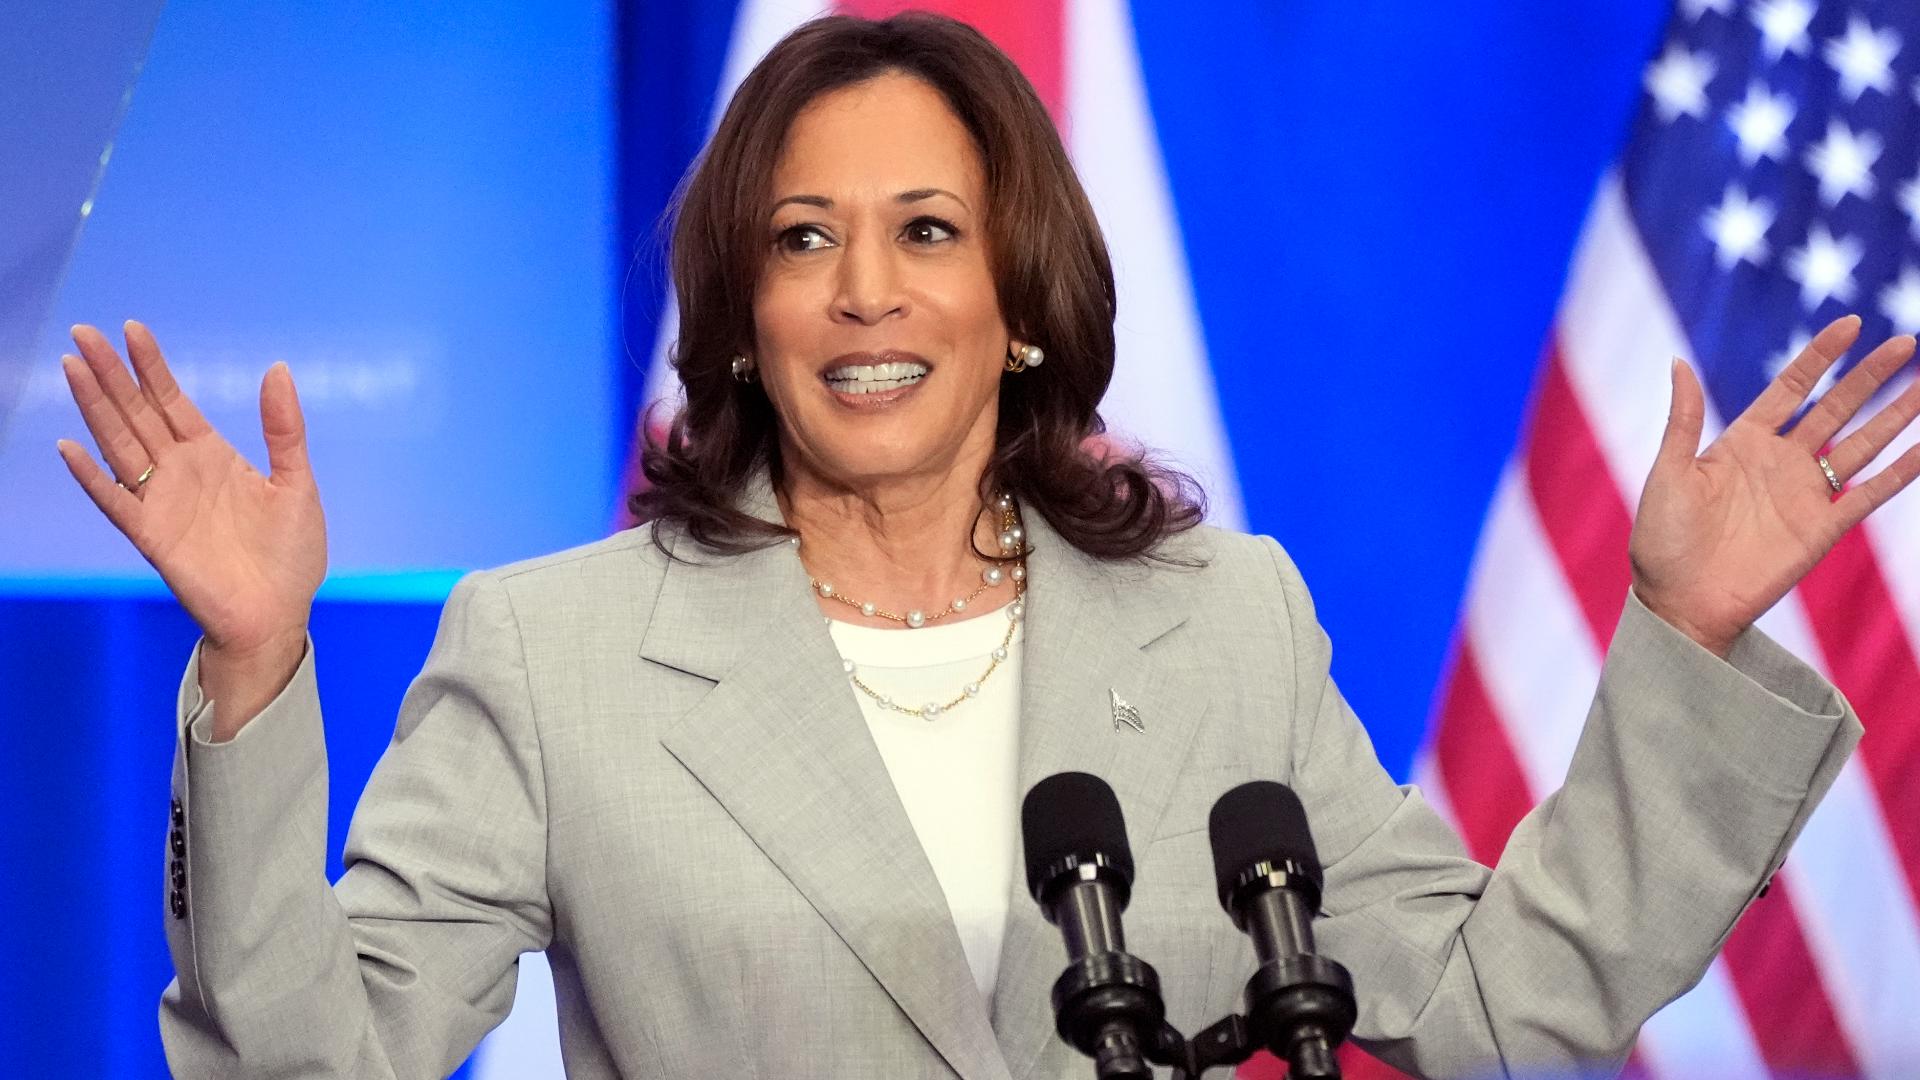 President Biden dropped out of the 2024 presidential race and said Vice President Kamala Harris should replace him. But she’s not guaranteed to be the new nominee.